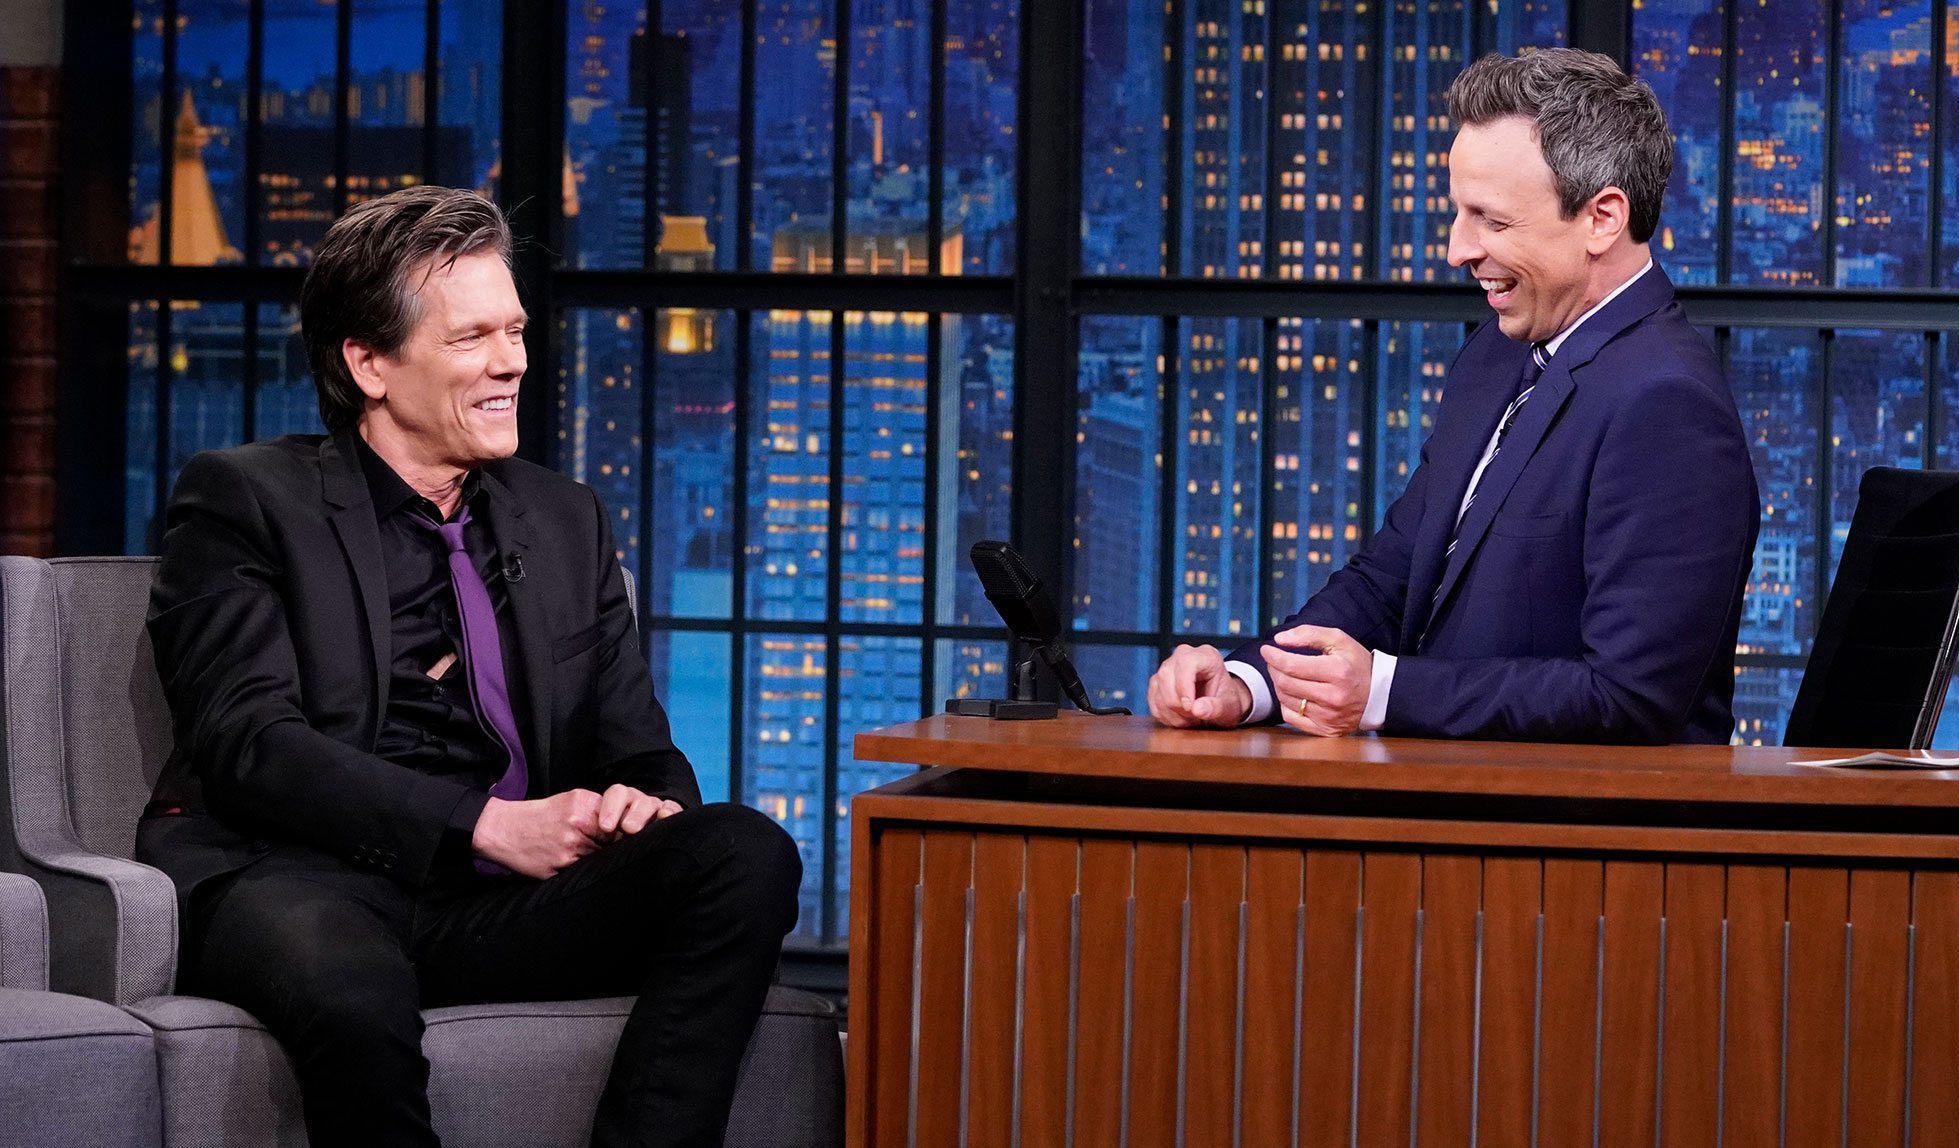 Watch Late Night with Seth Meyers Episode: Kevin Bacon, Cobie Smulders, Jordan Klepper ...1959 x 1148